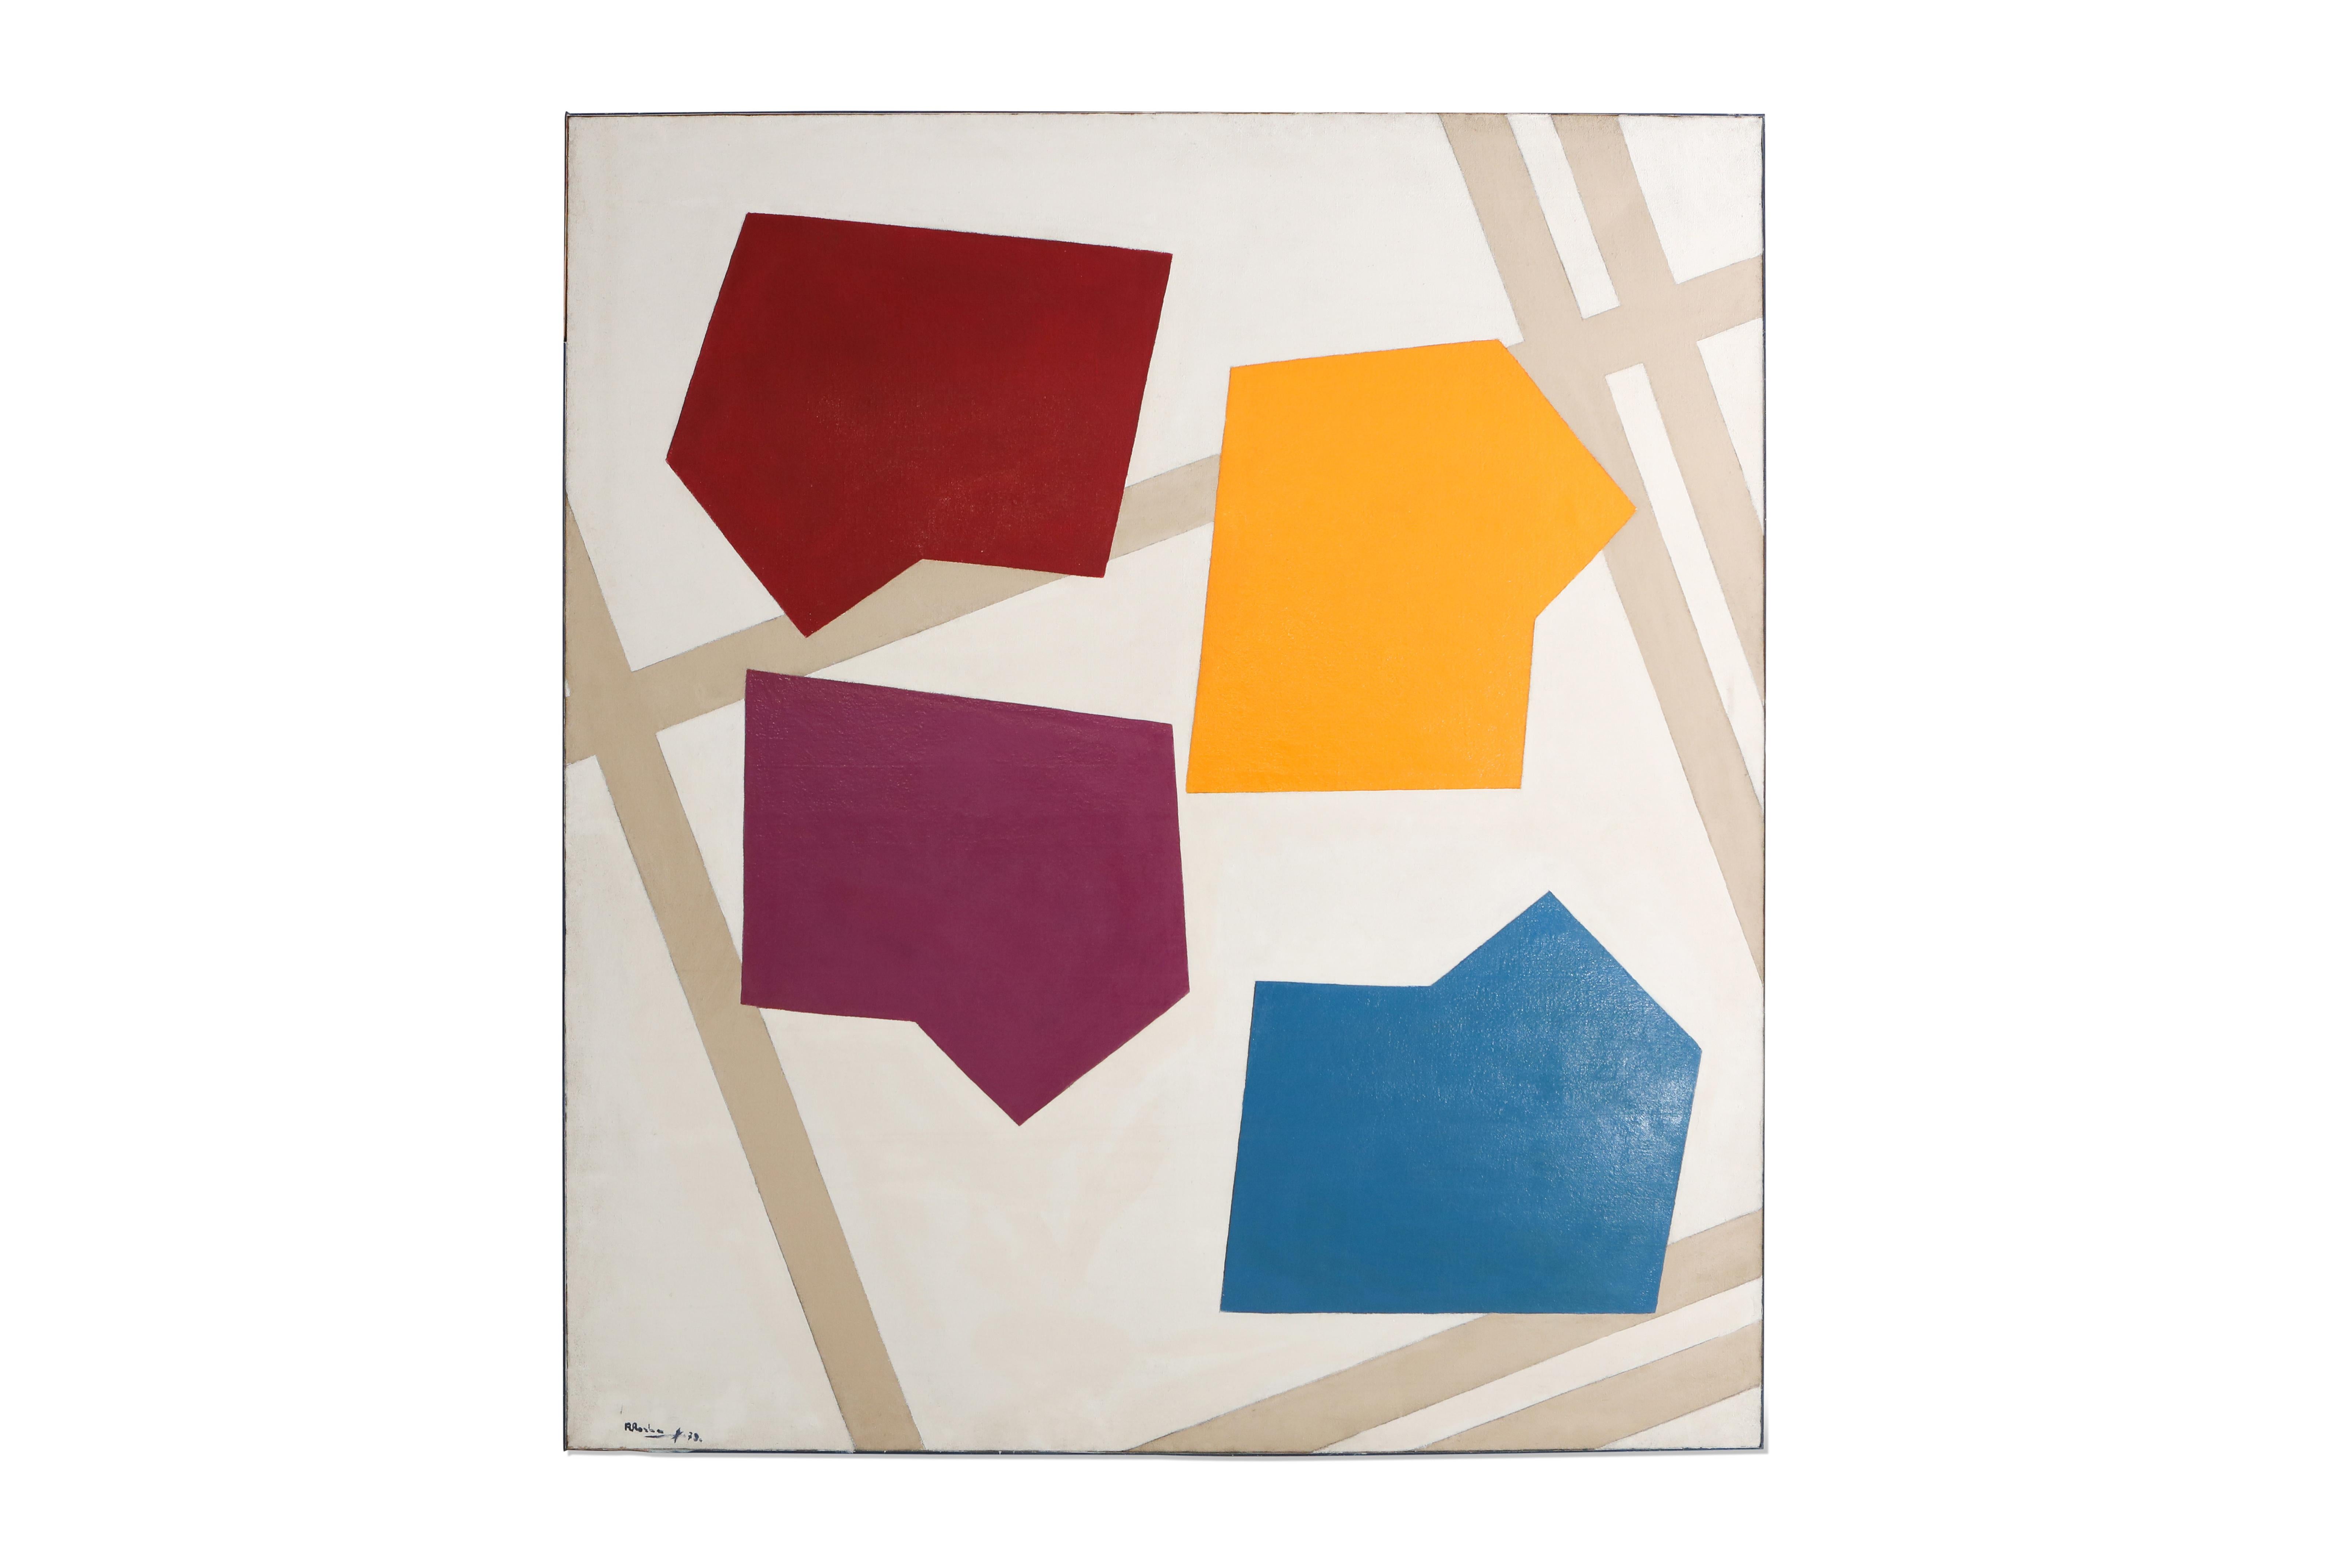 European, Contemporary Abstract Painting by René Roche on Canvas, Late 20th Century; France; 

Painting by René Roche, 1979, contemporary painting, post-war artwork, graphic artwork.

Exhibited in the exhibition 'Espace et abstraction' in Palais